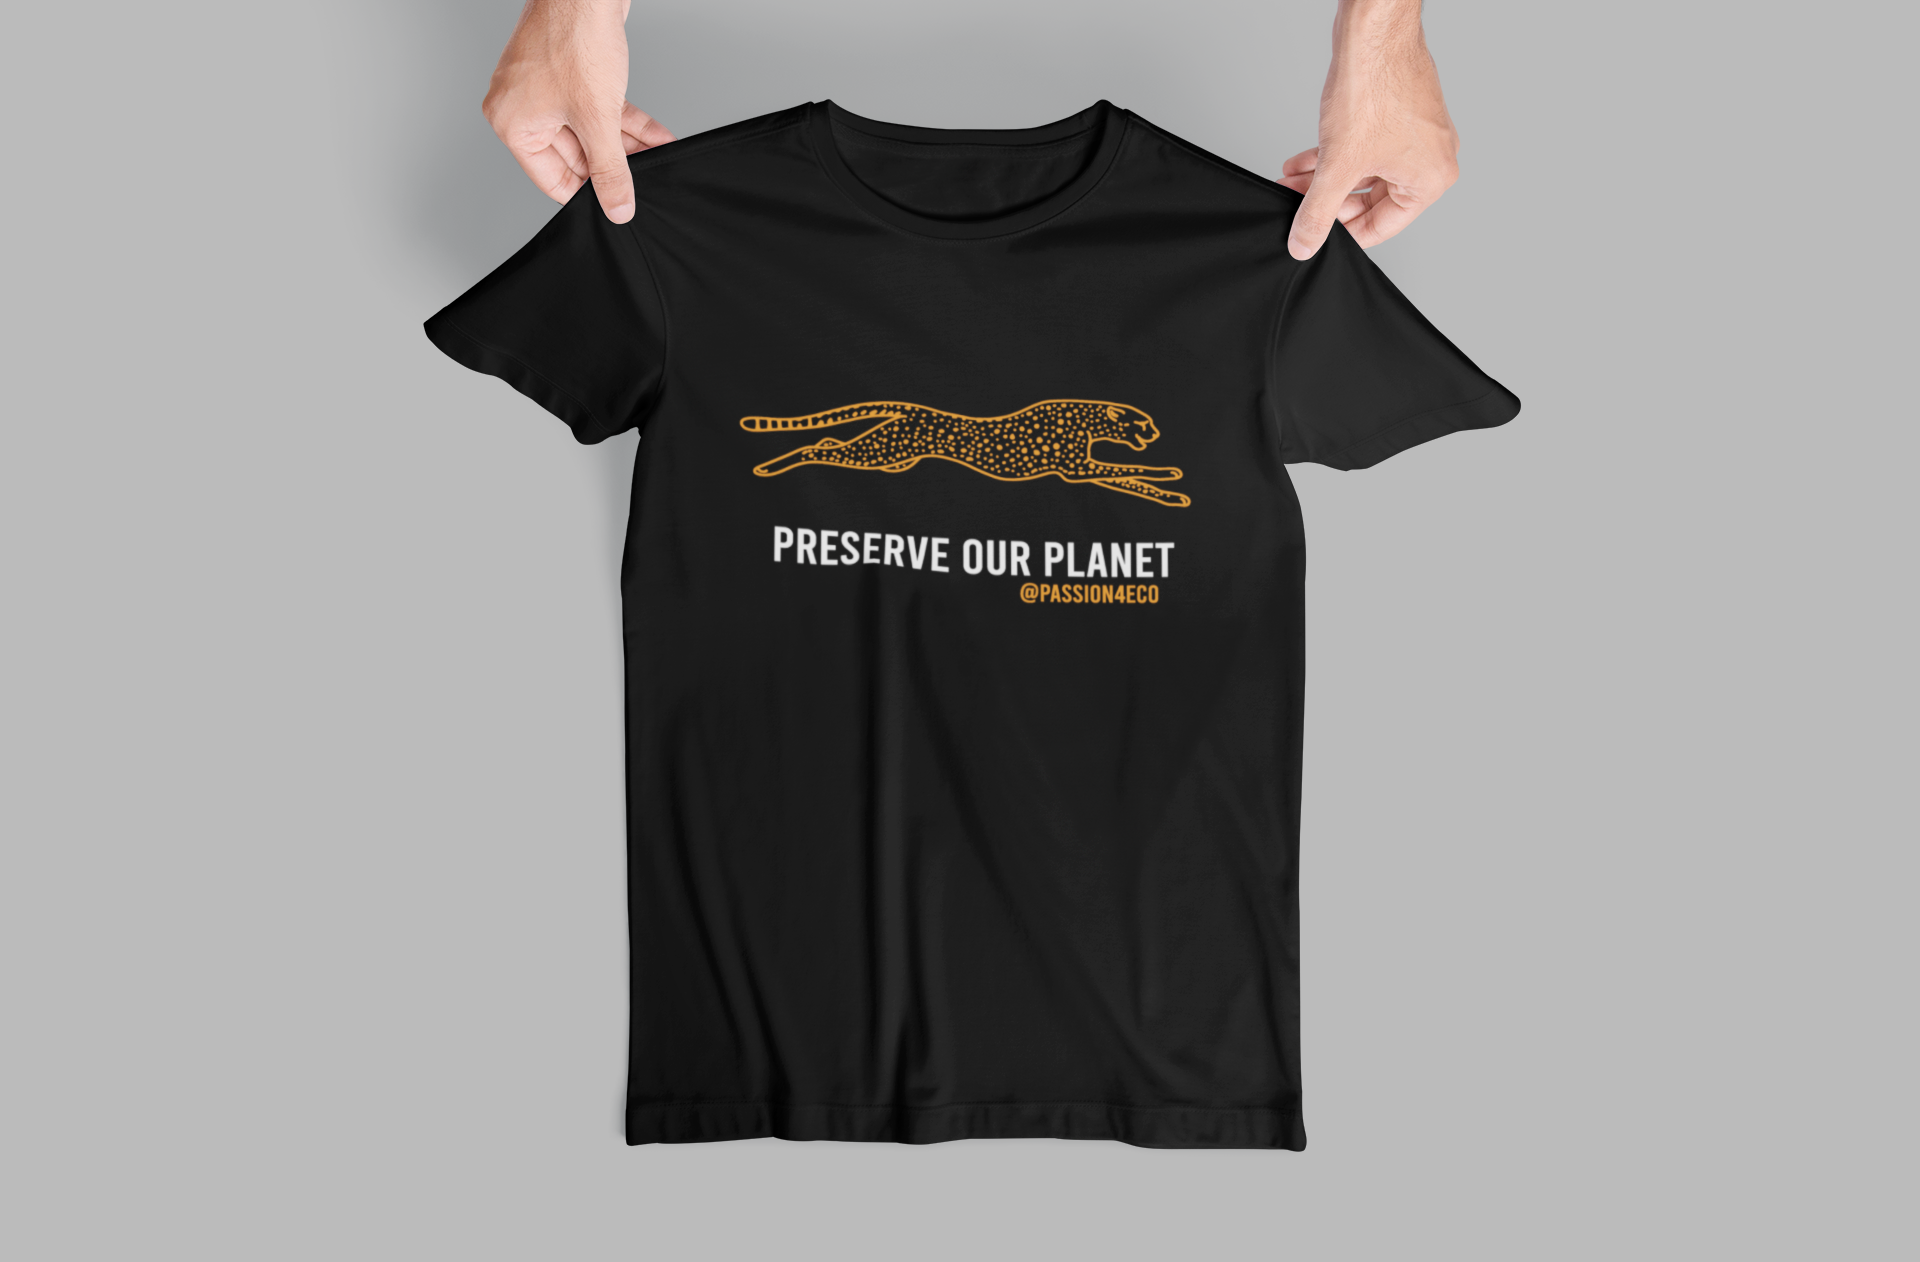 "Preserve Our Planet" Cheetah Graphic Tee